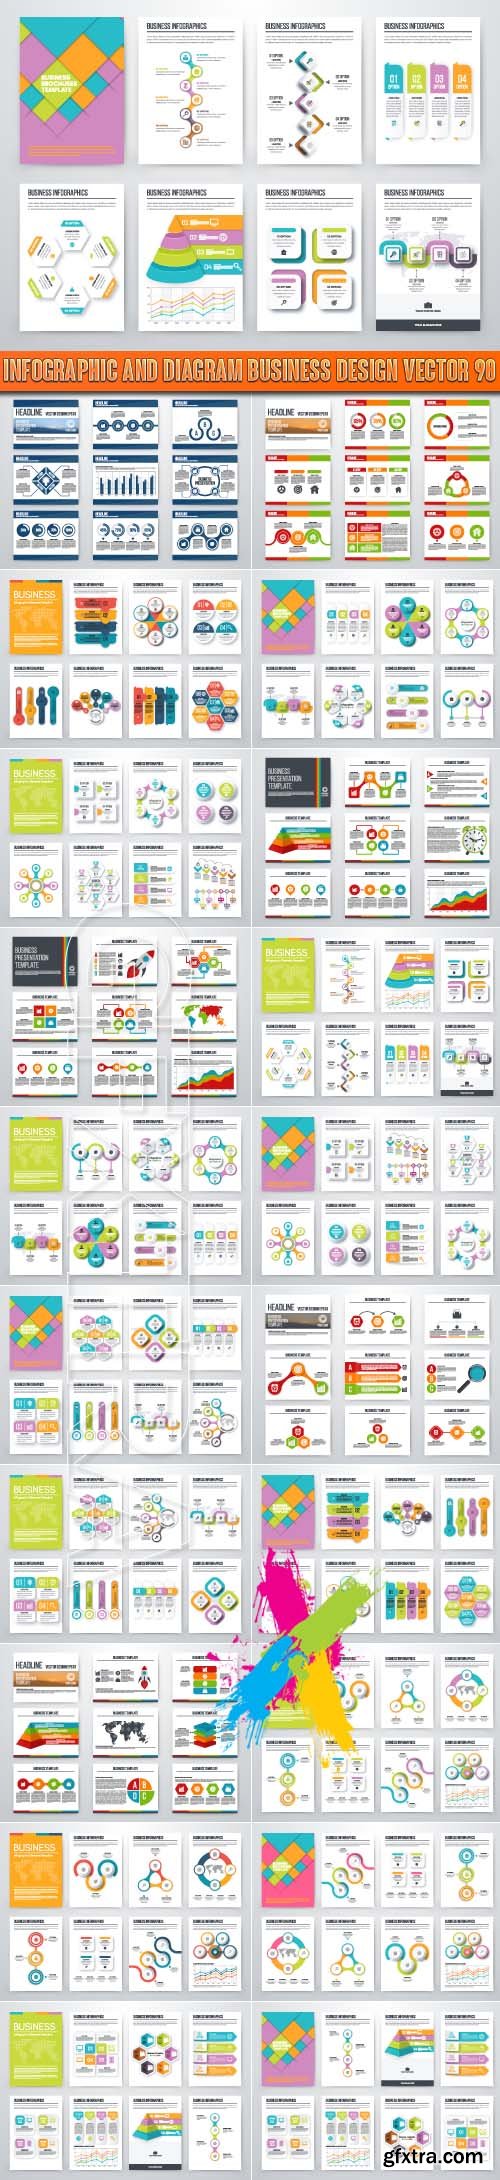 Infographic and diagram business design vector 90